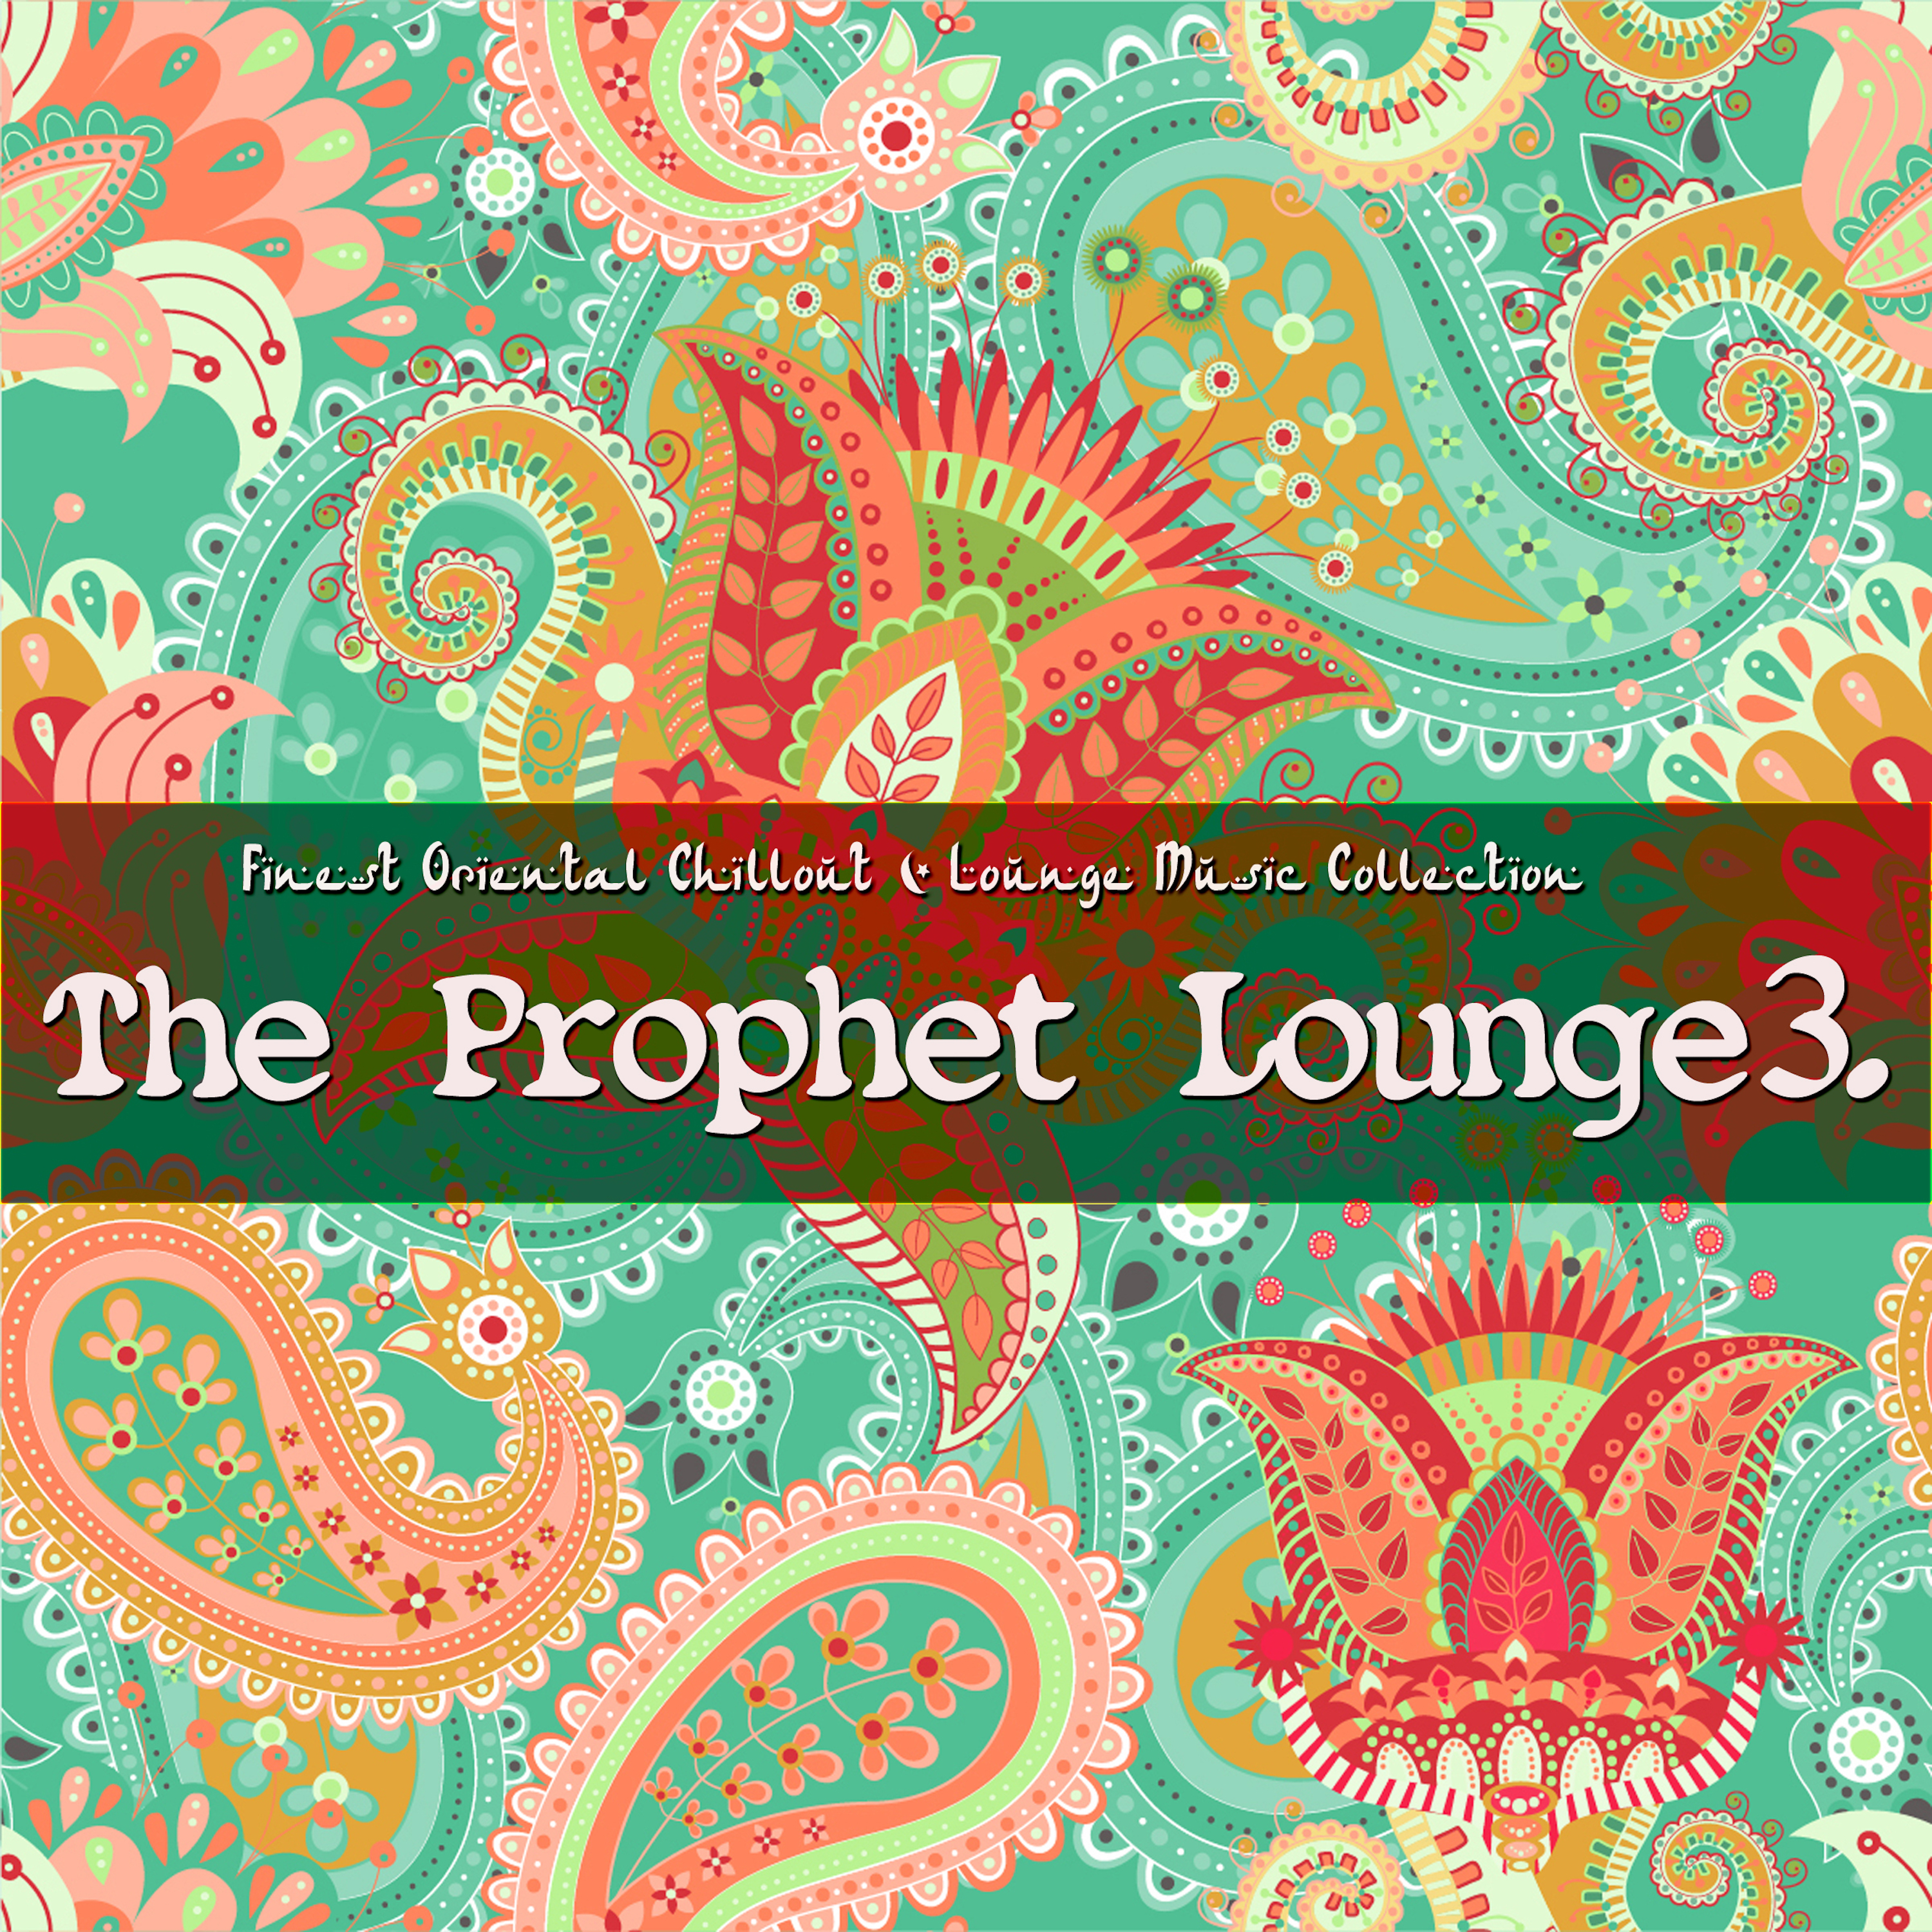 The Prophet Lounge 3 (Finest Chillout & Lounge Music Collection)